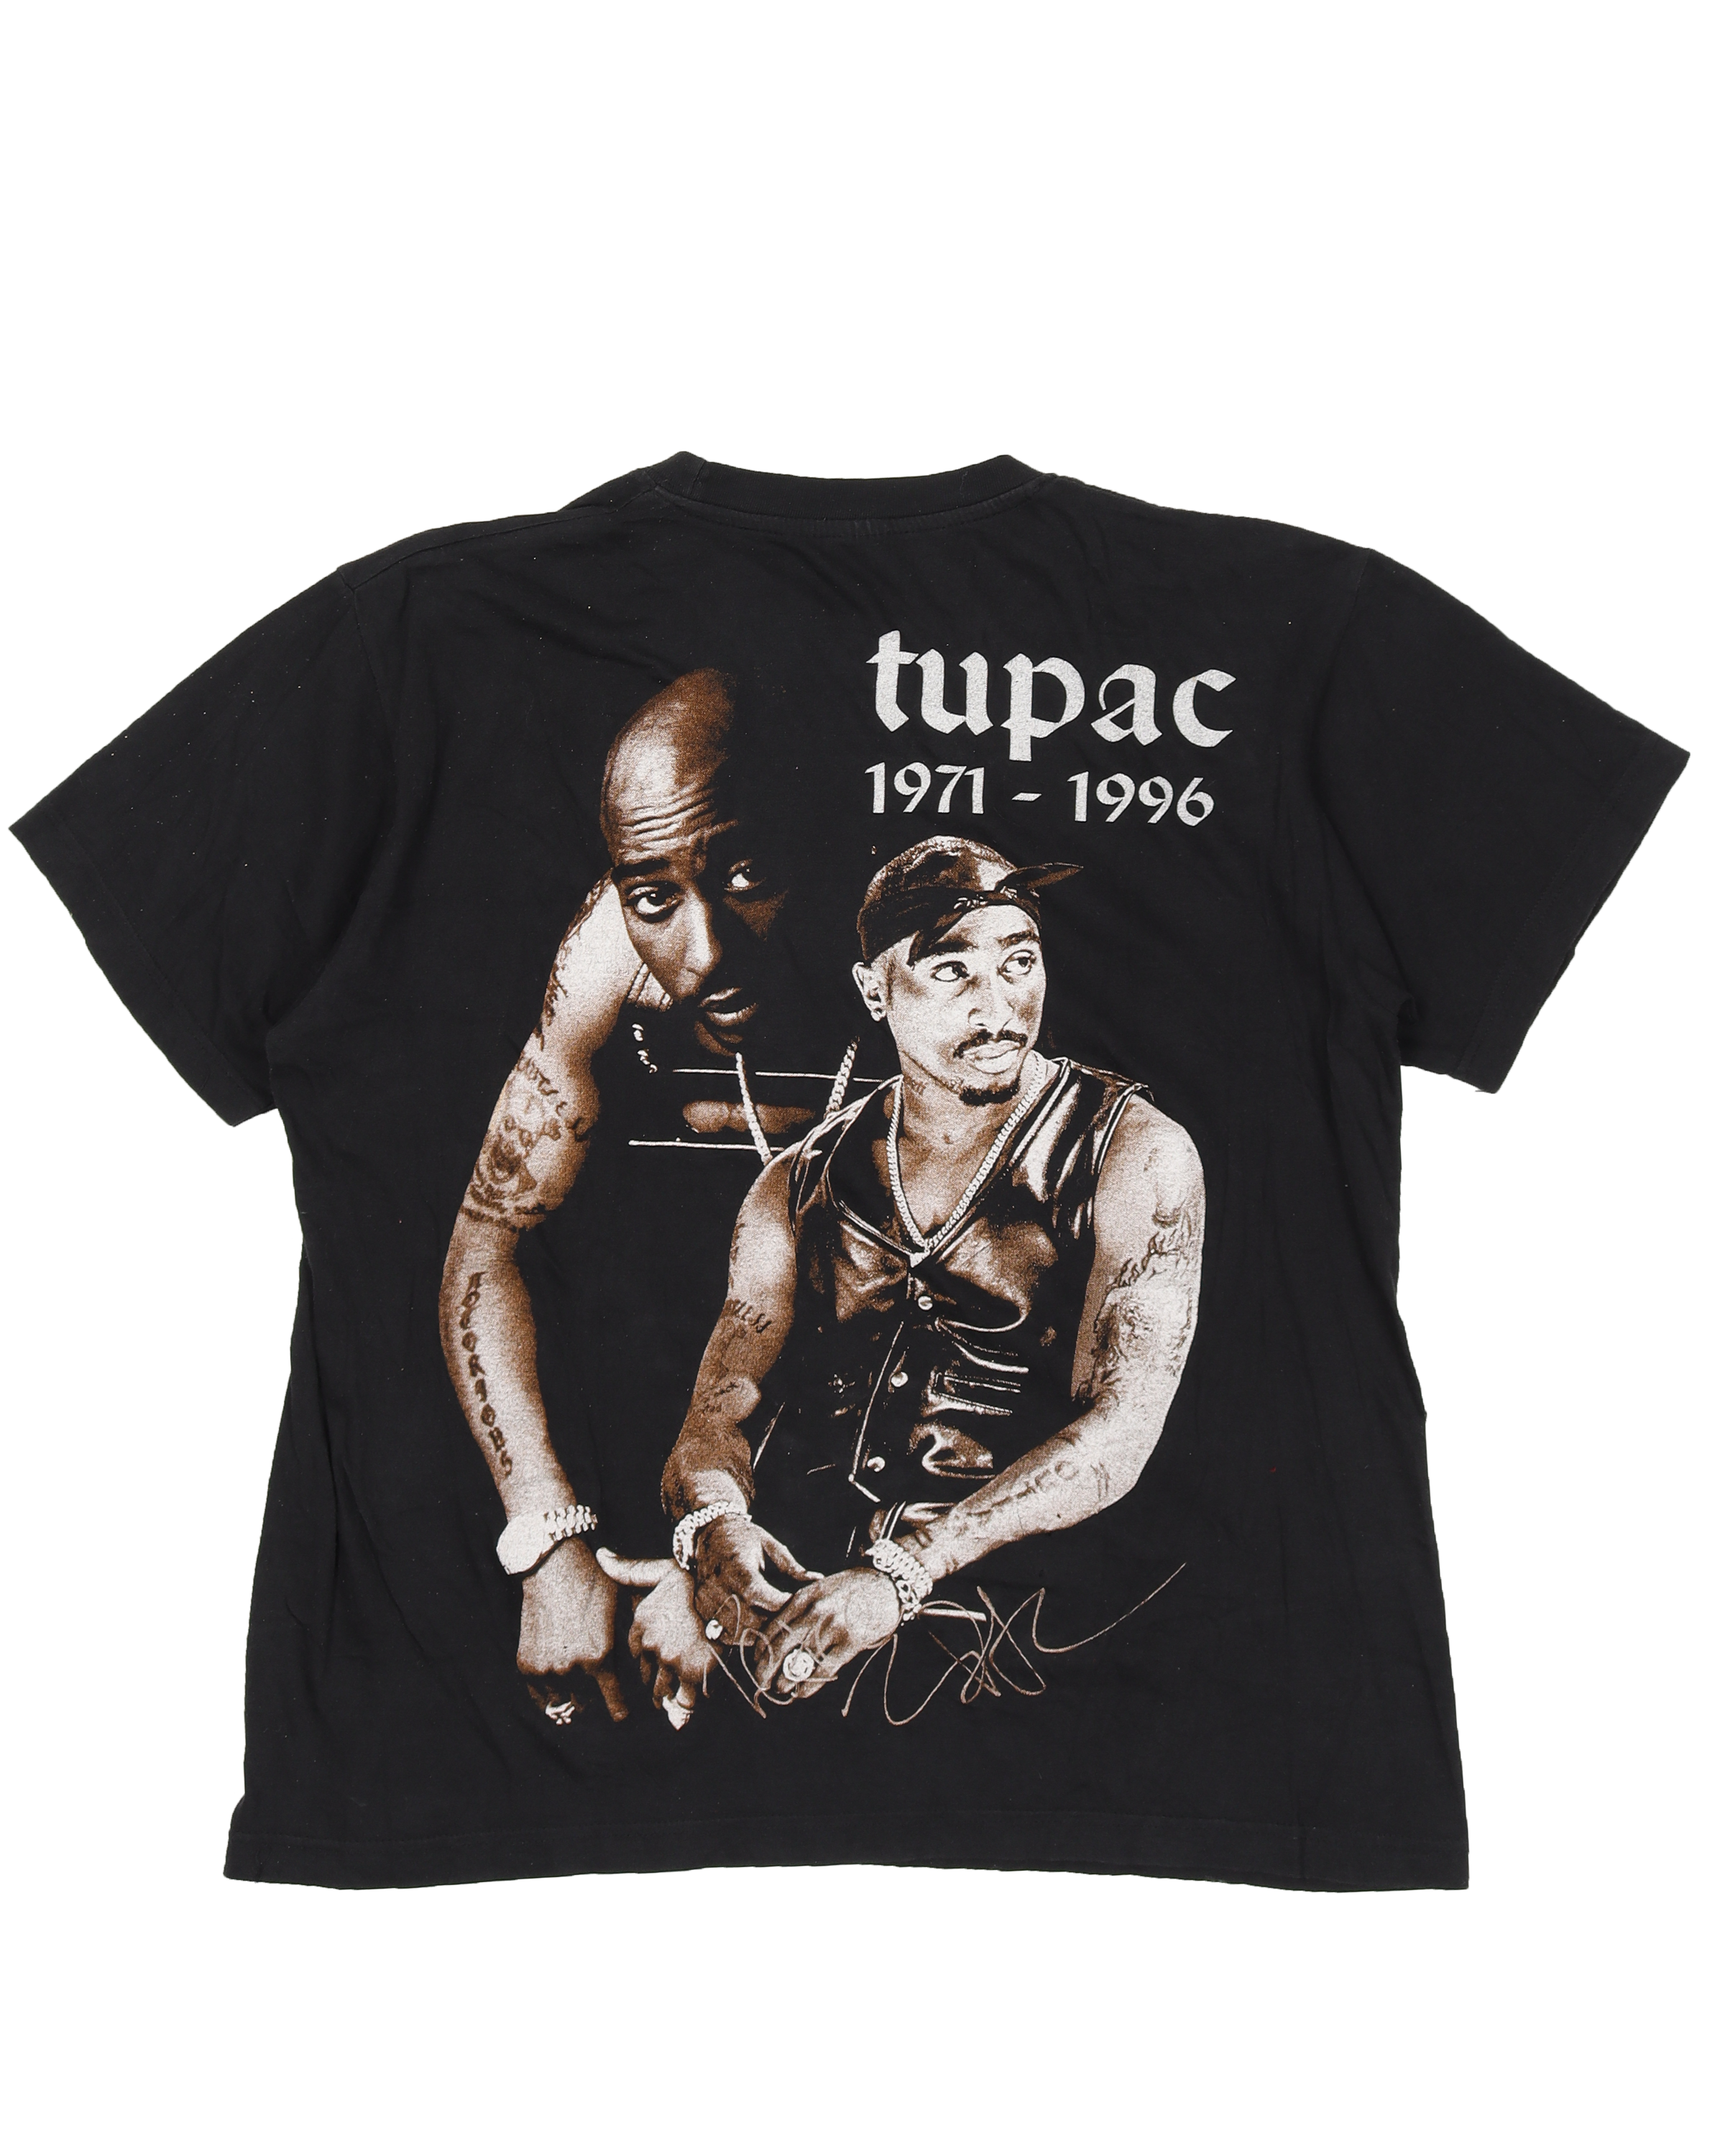 Tupac "Do For Love" T-Shirt